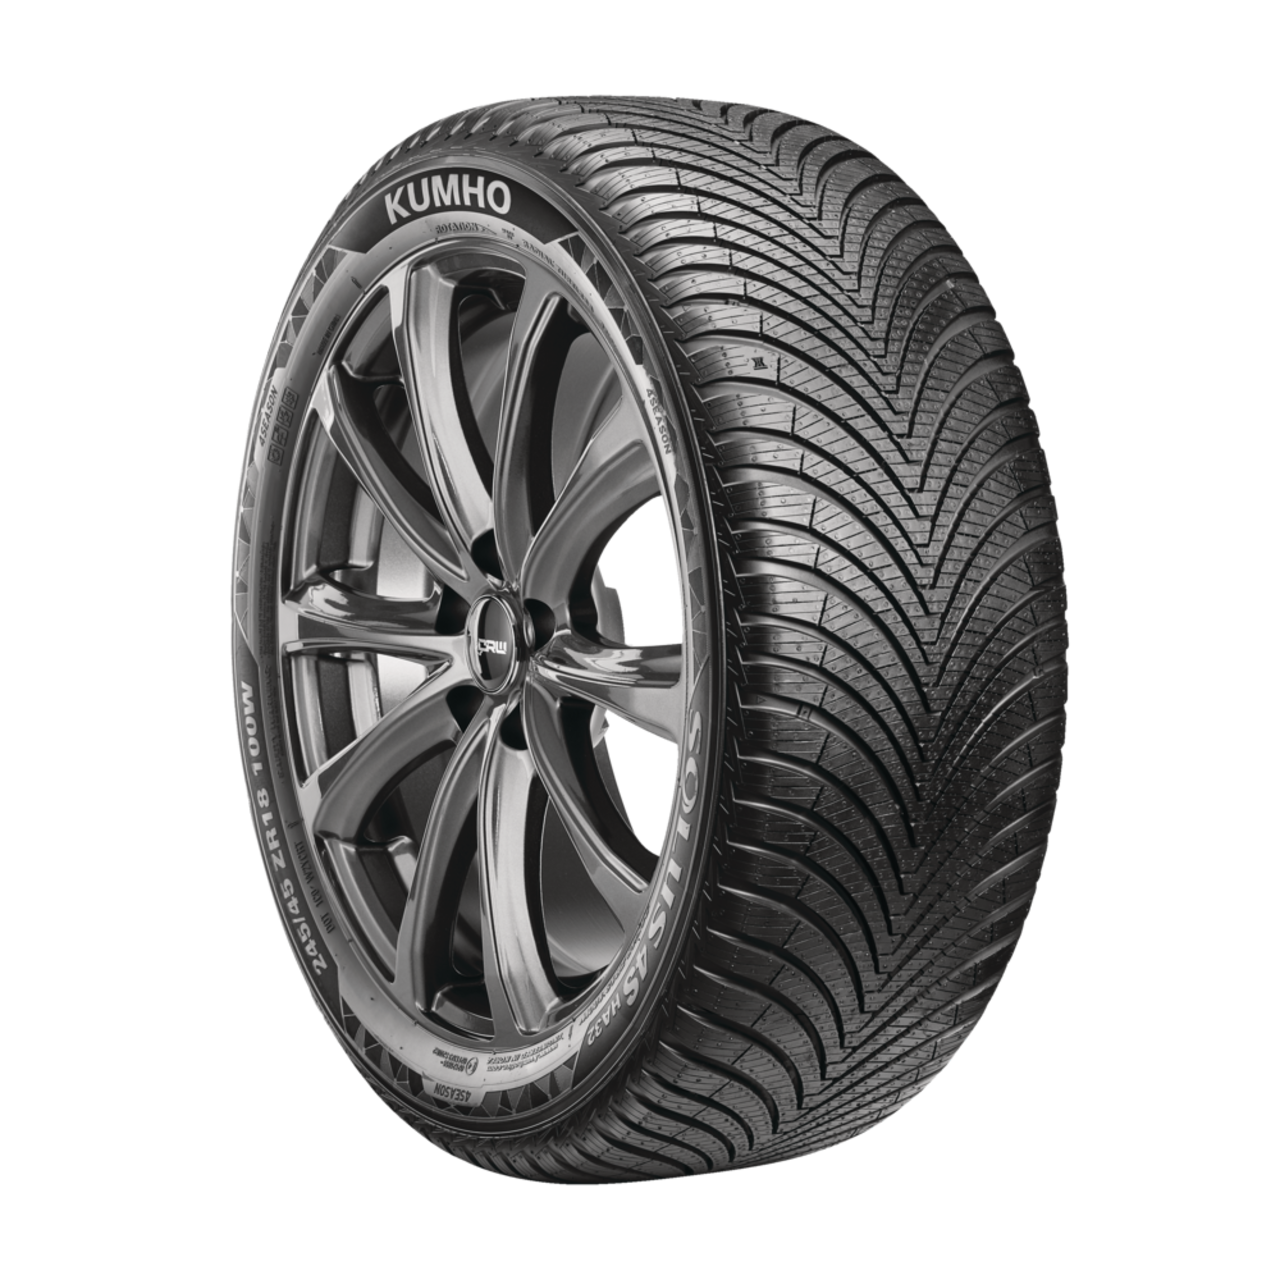 HA32 & All 4S Kumho Tire Passenger Tire | Solus Canadian CUV For Weather